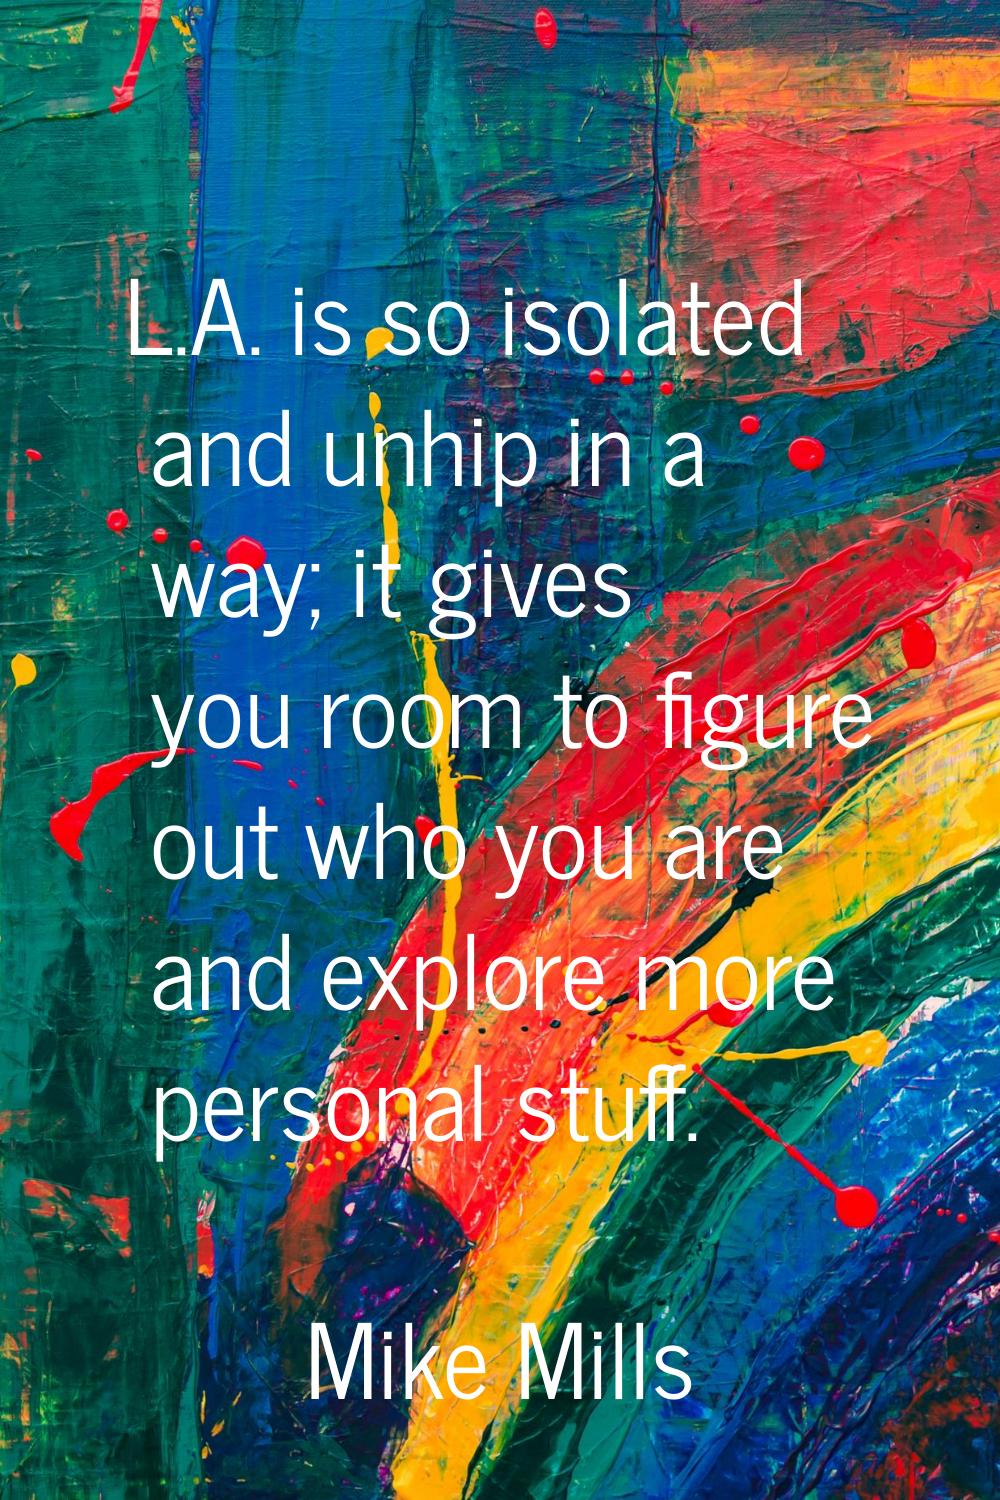 L.A. is so isolated and unhip in a way; it gives you room to figure out who you are and explore mor